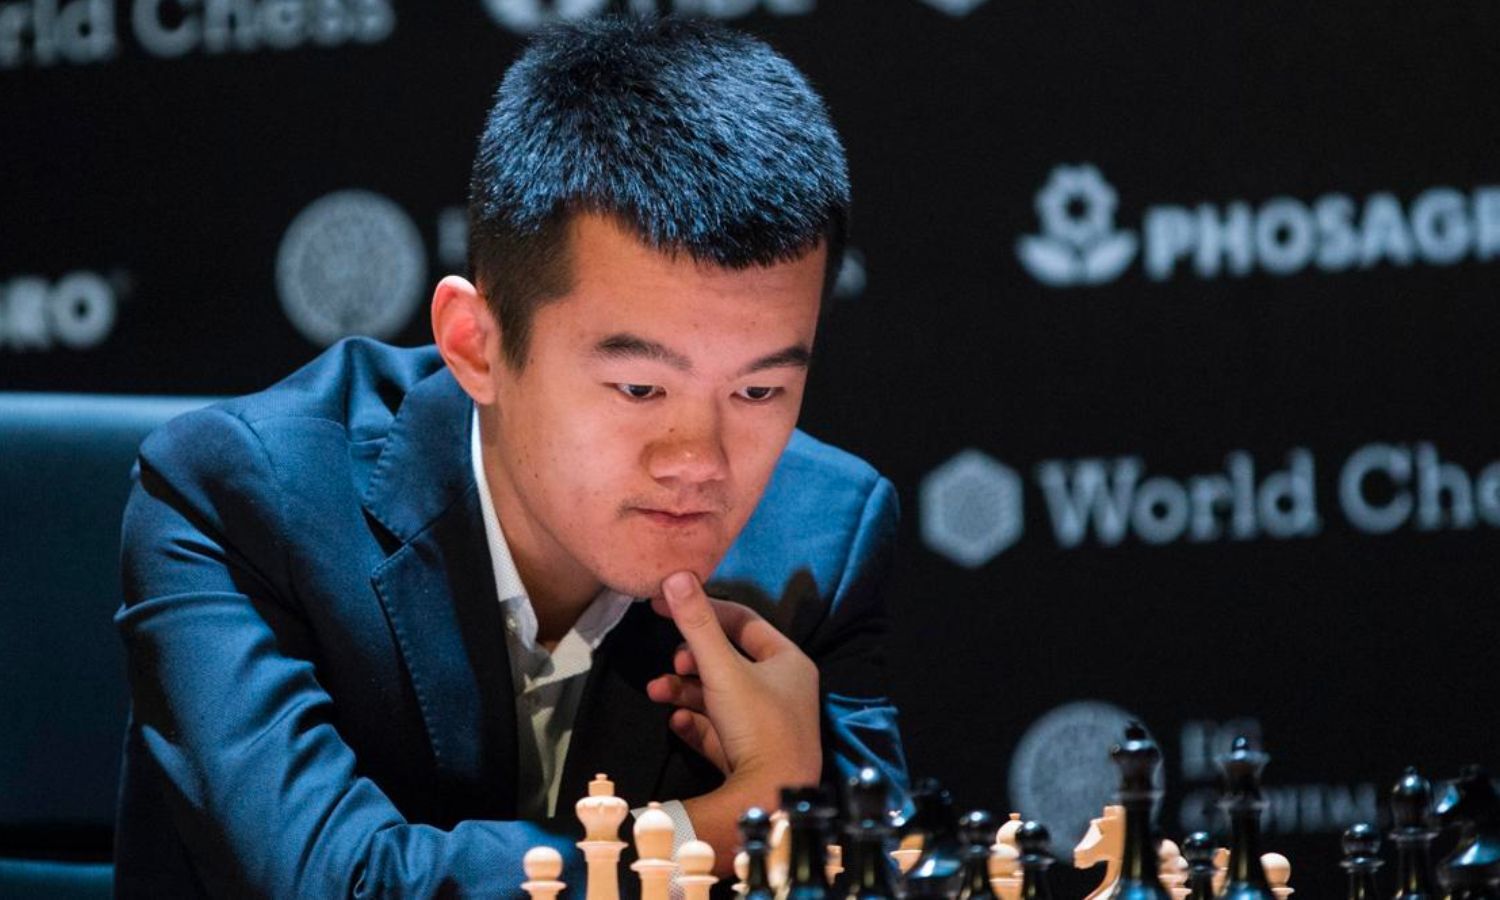 chess24 - Ding Liren ends the Hangzhou tournament with 10.5/12 and